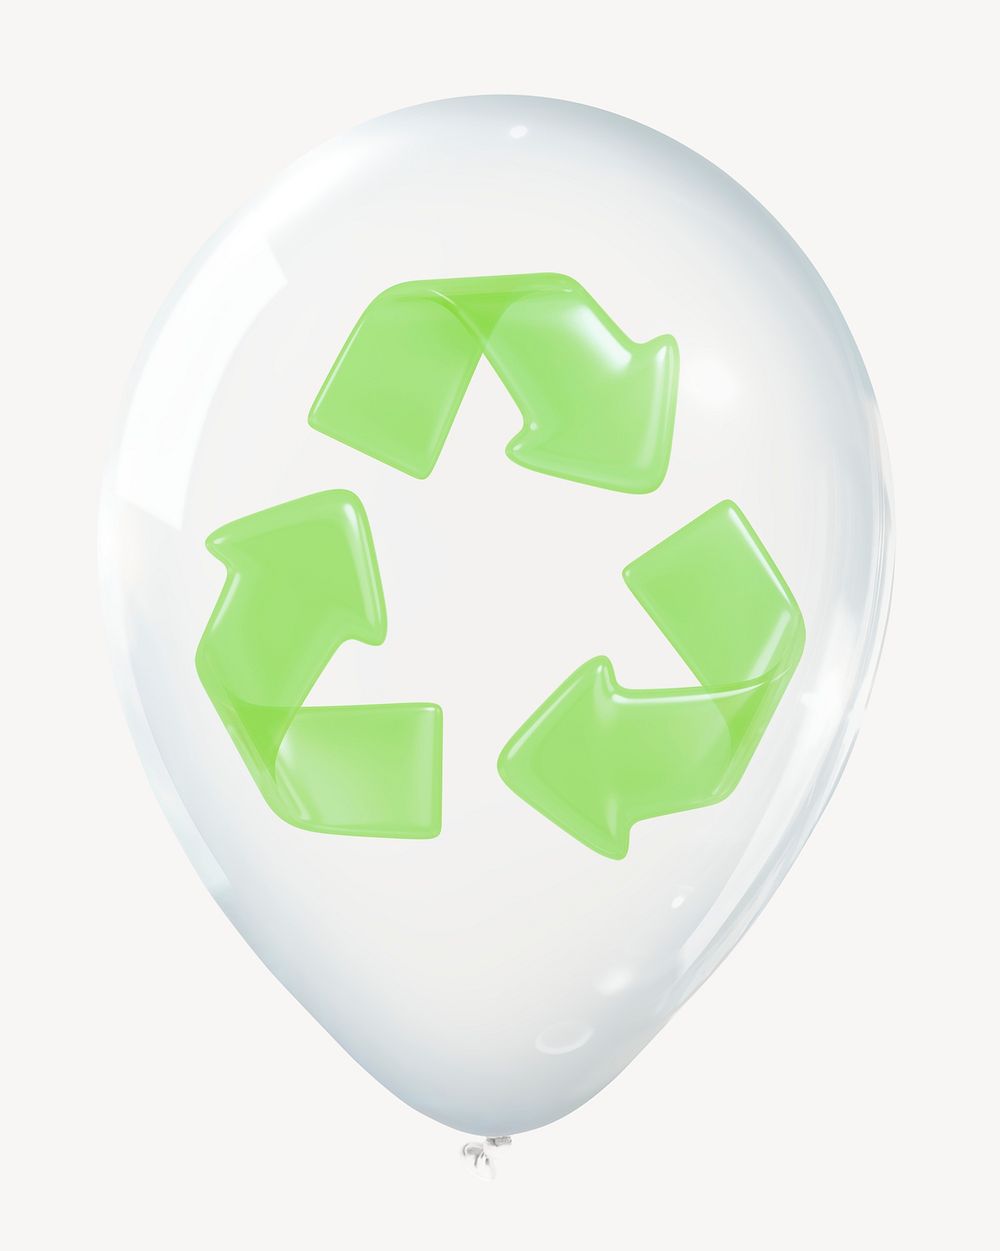 Recycle icon 3D balloon collage element psd